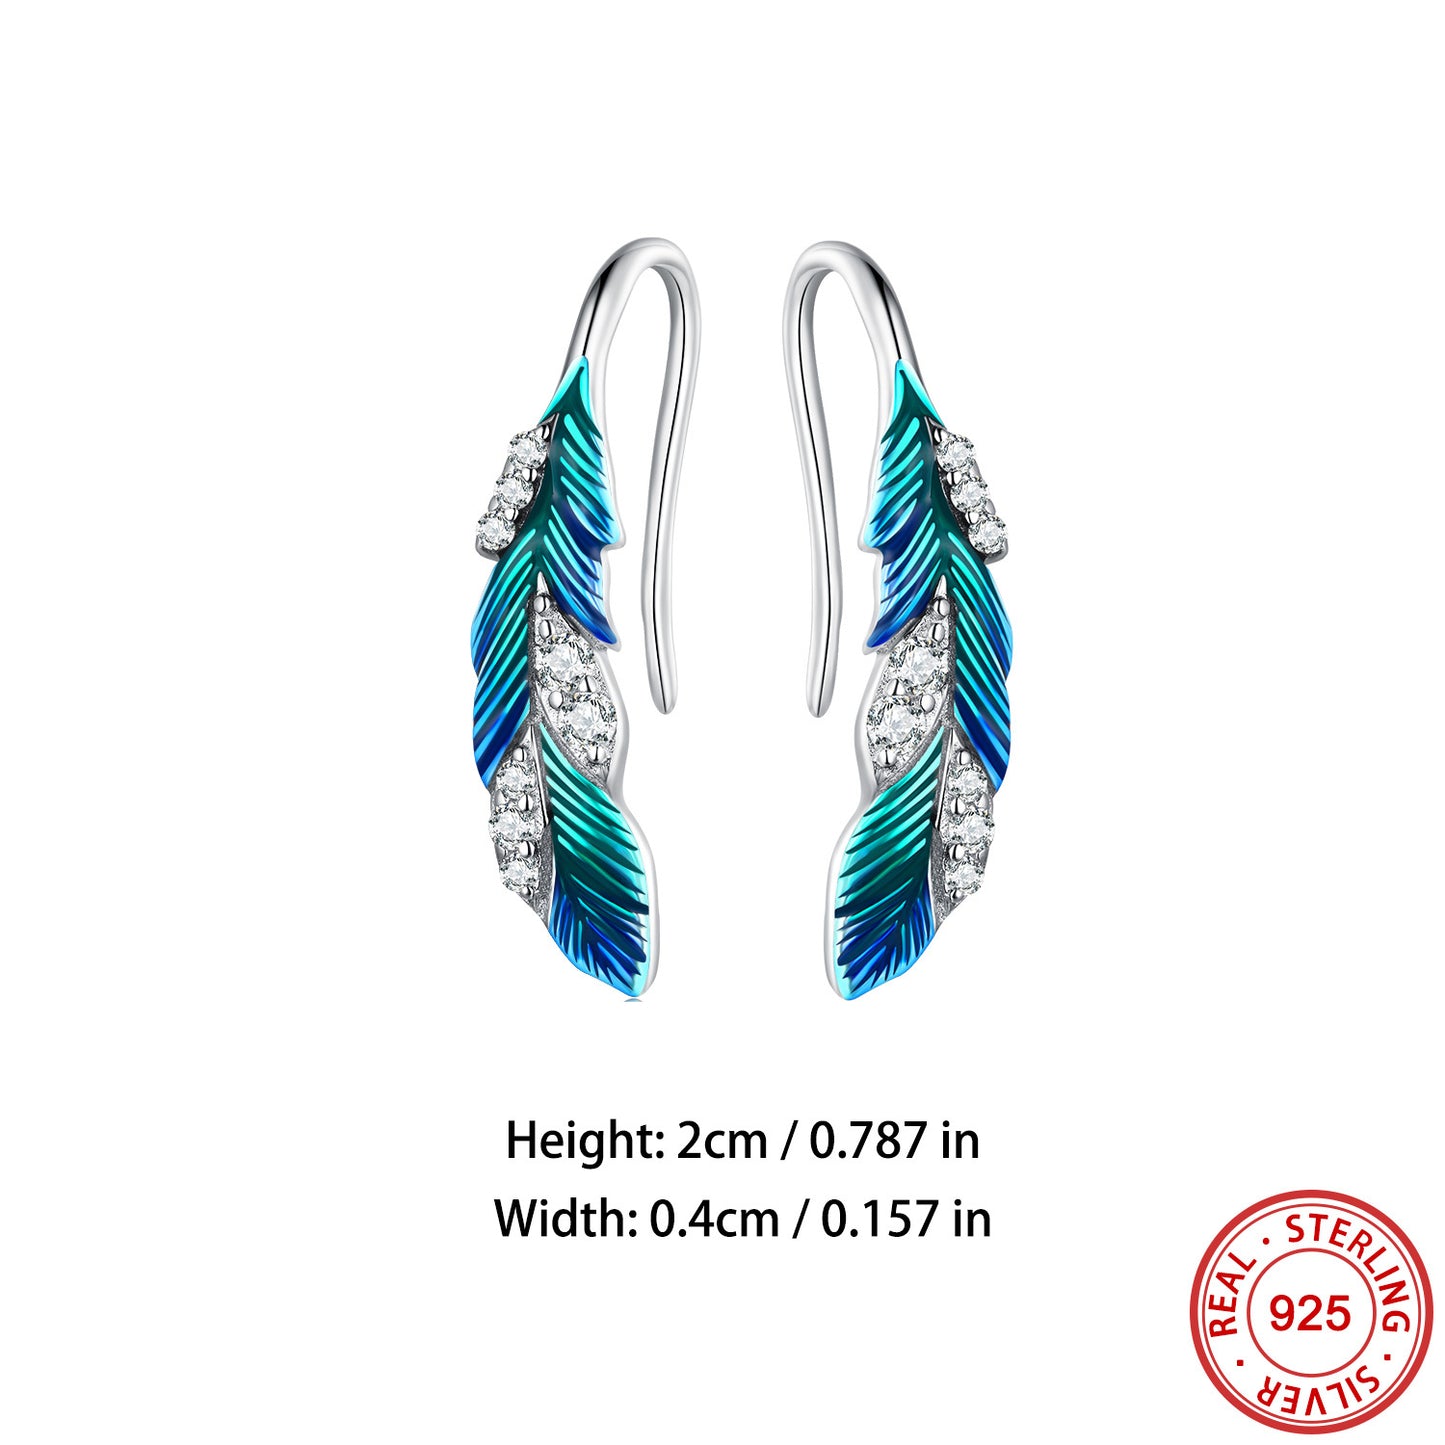 Sterling 925 Silver Feather Design Dangle Earrings - Cute Delicate Gift